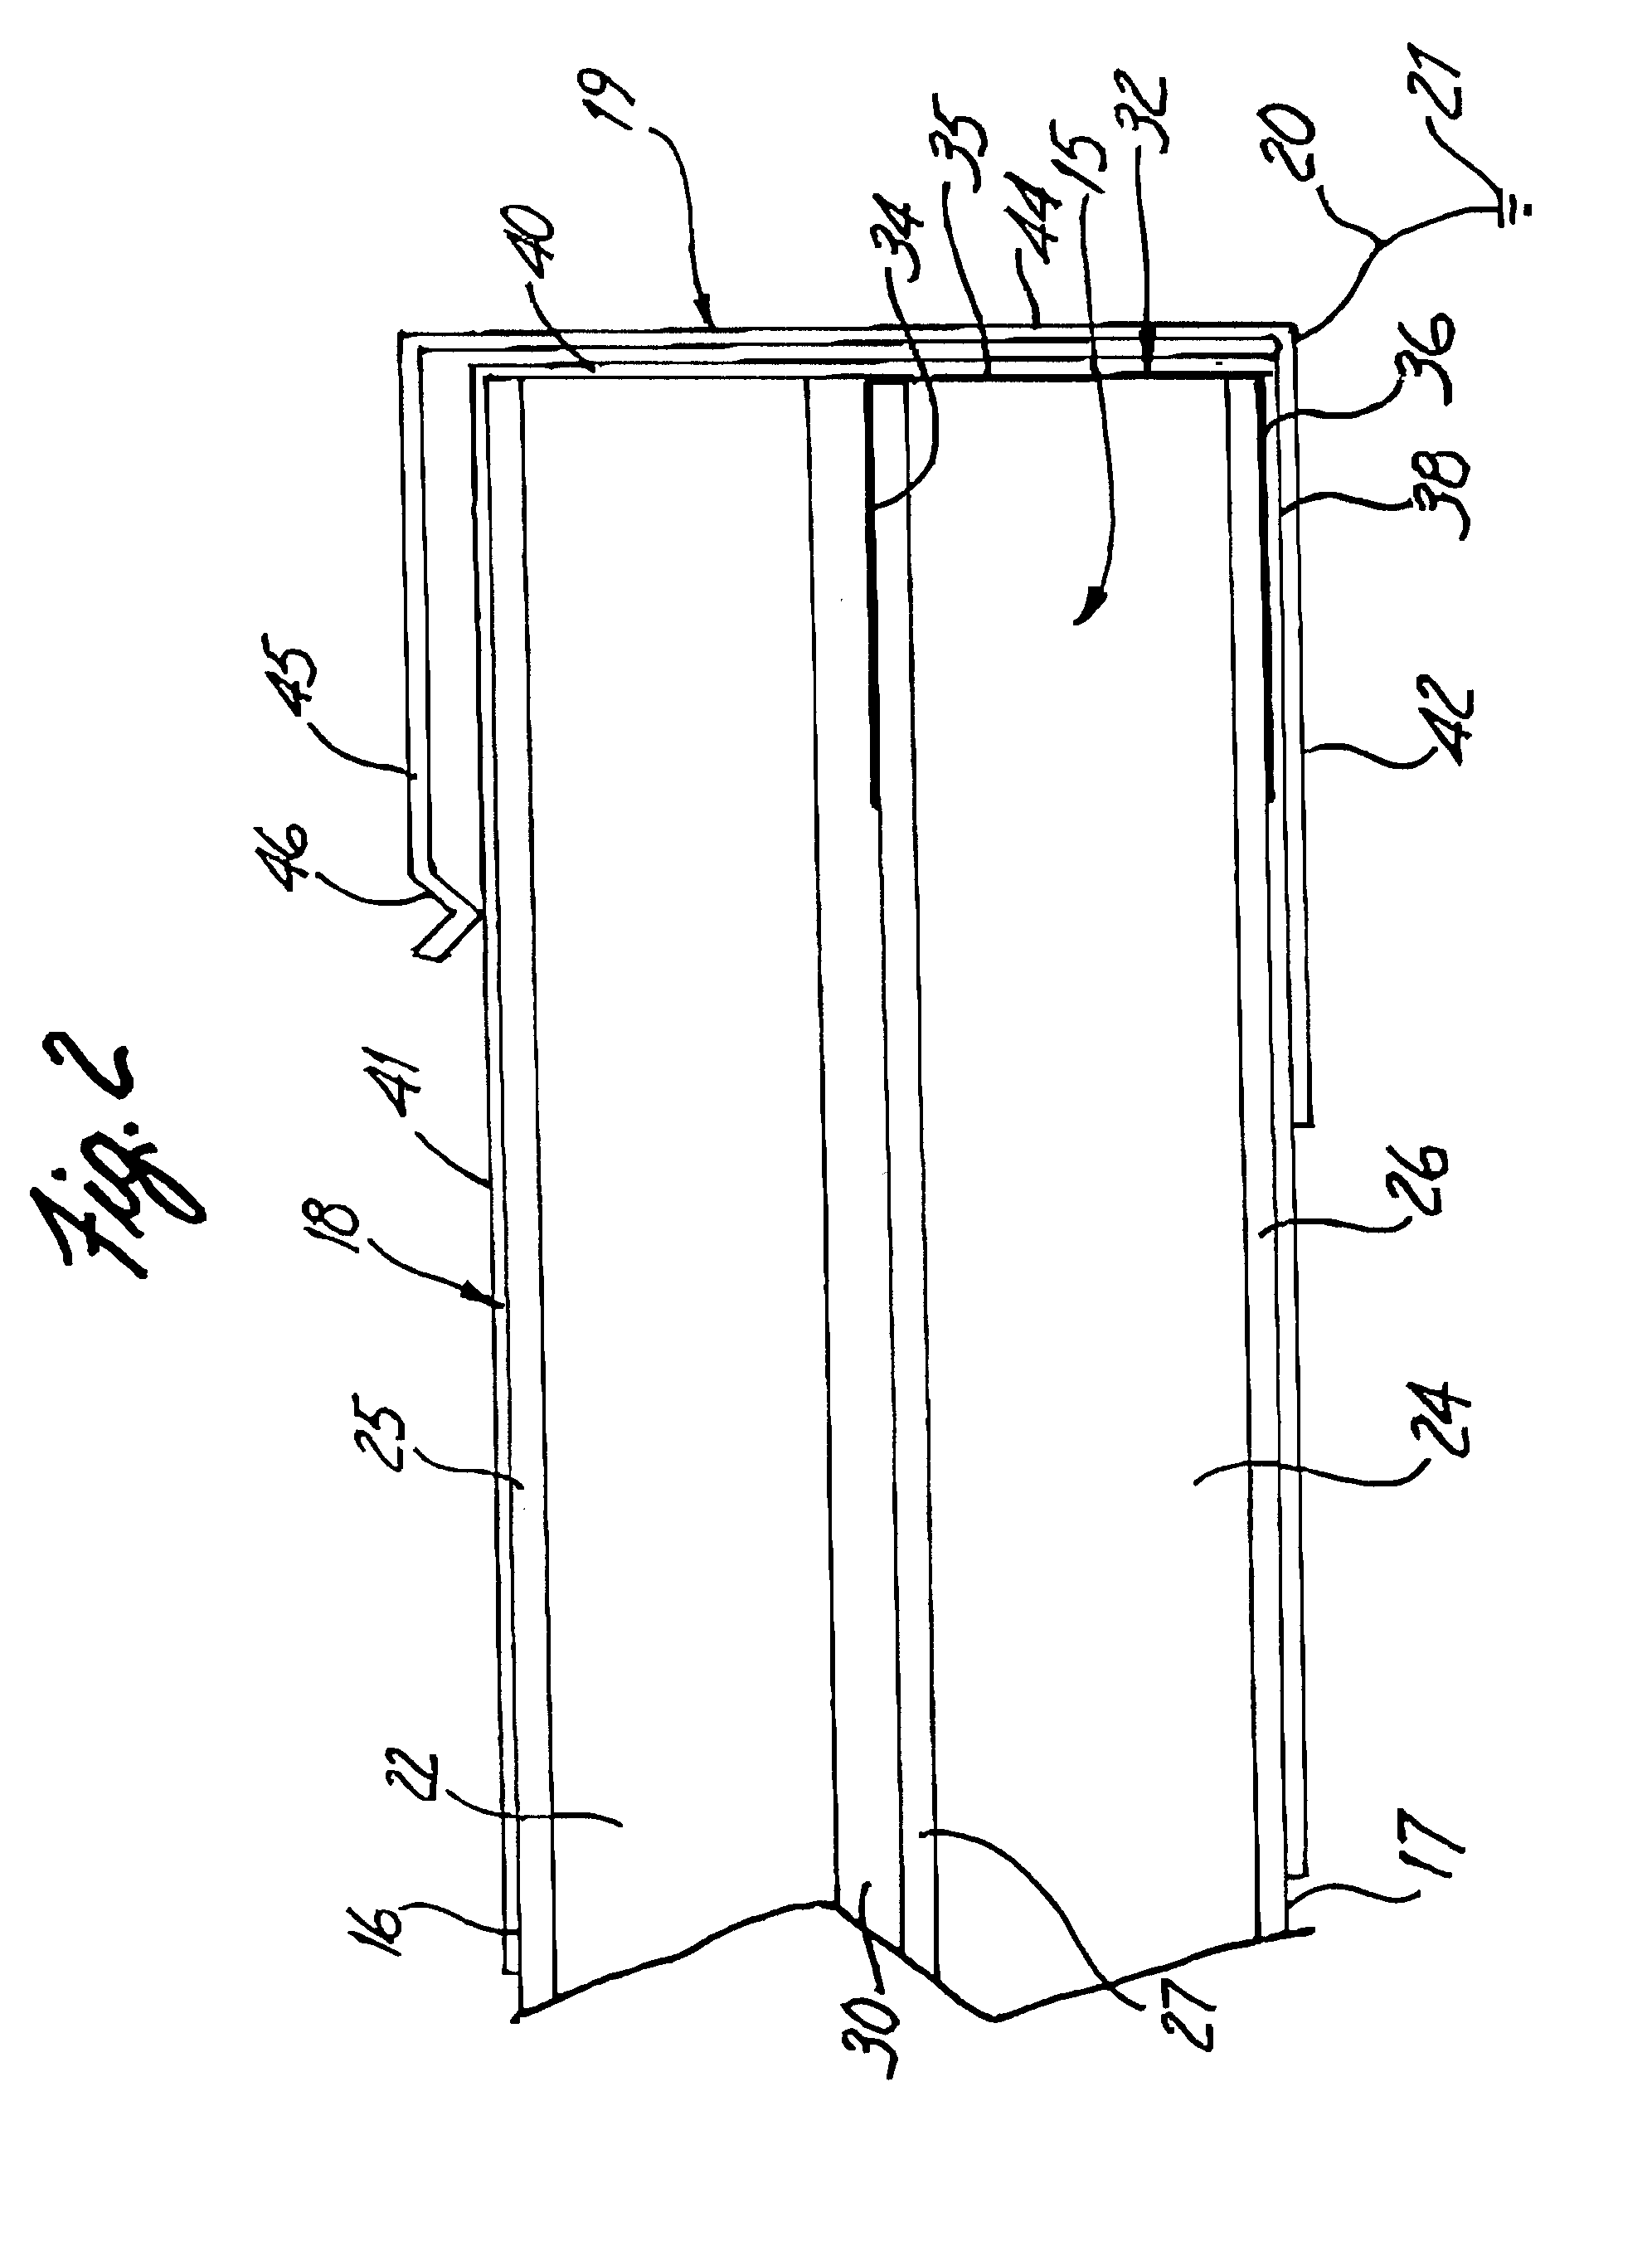 Display panel filter and method of making the same